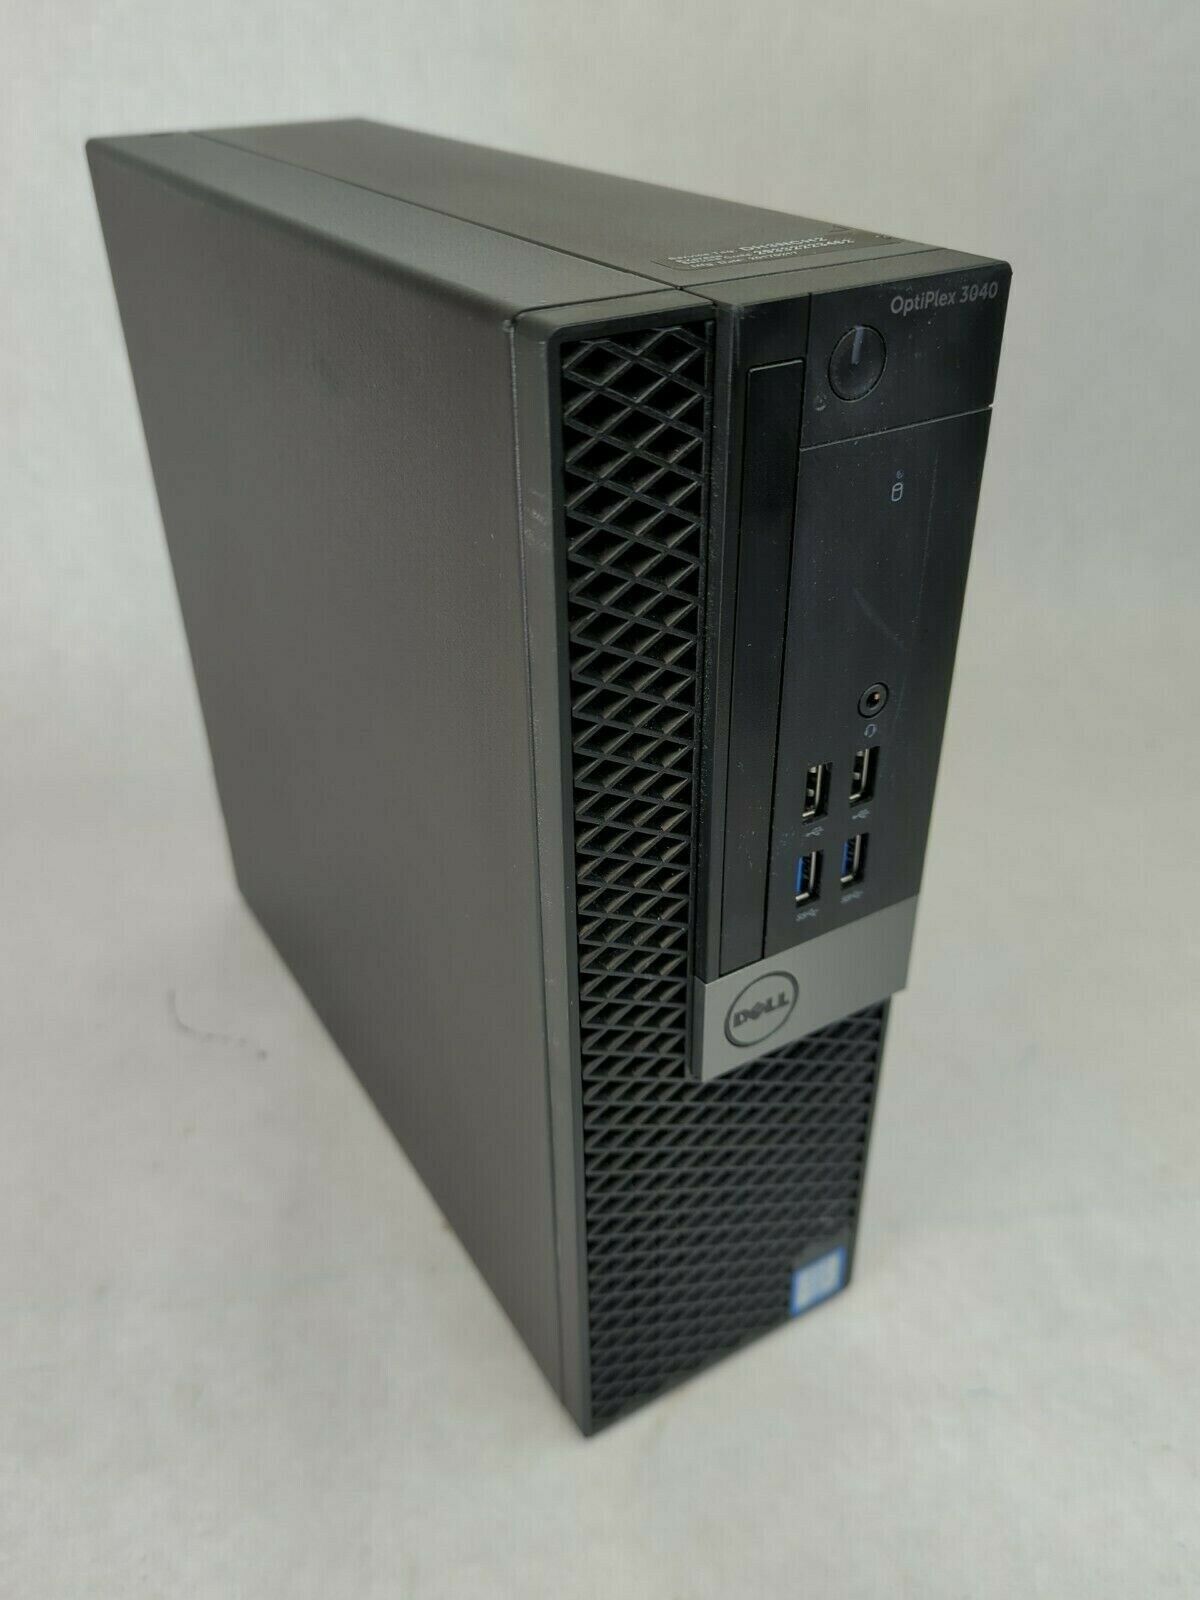 Dell Optiplex 3040 Intel Core i3-6100, 8GB RAM, No HDD. Tested works perfect